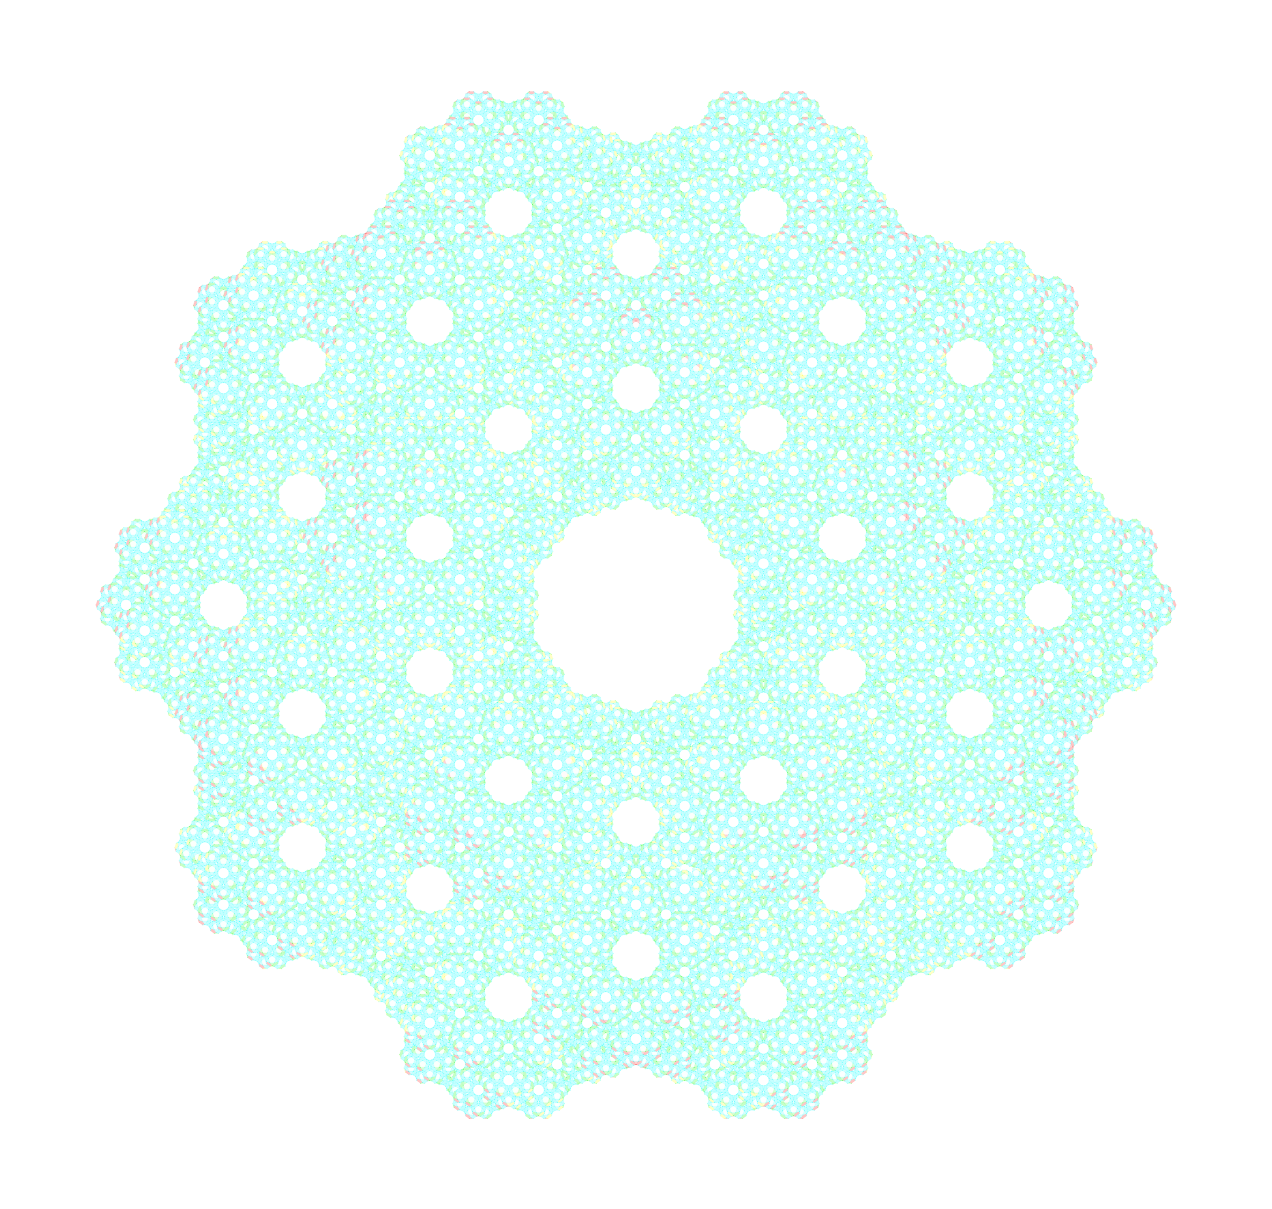 Iteration 3 of the icosidodecahedron fractal, viewed from the perspective with 5-fold rotational symmetry. It's mostly cyan with a large quasi-circular hole in the center. Various other holes can be seen, forming pentagons and dodecagons with the other holes